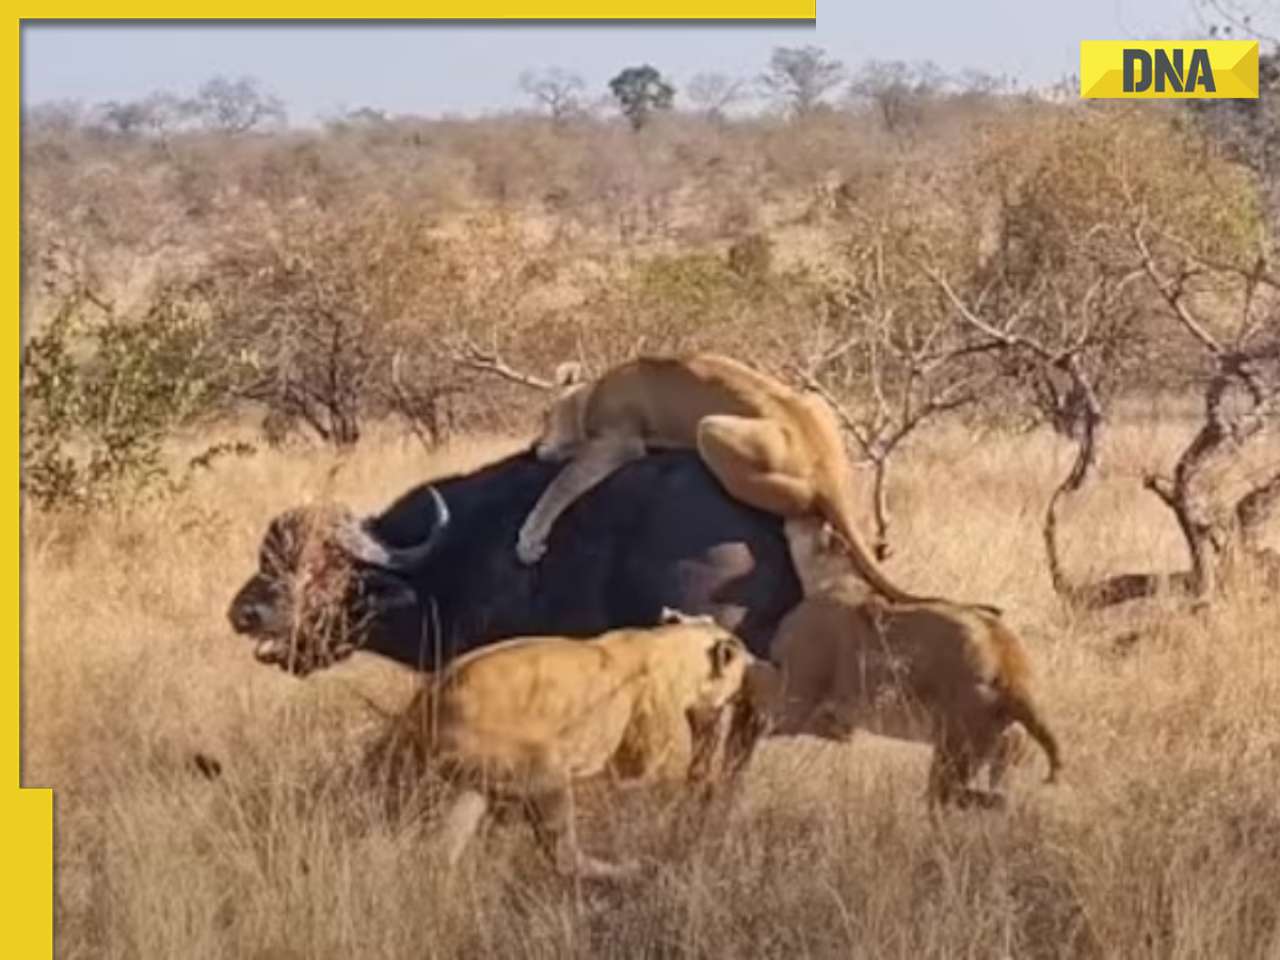 Viral video: Brave buffalo battles pride of lionesses in dramatic wildlife encounter, watch